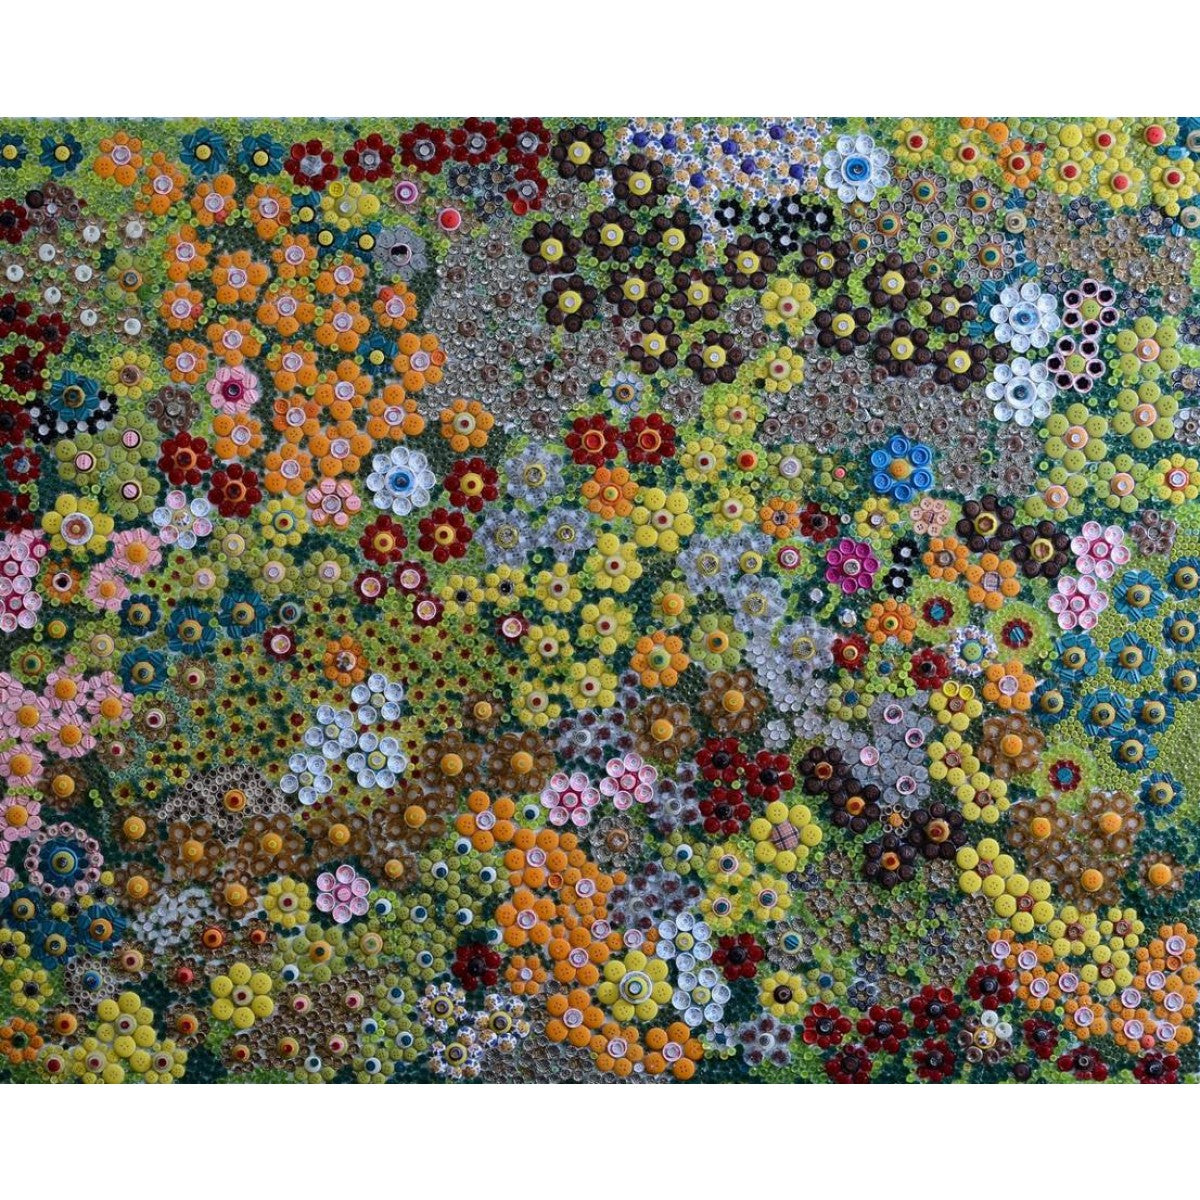 Flowers in Buttons_2 by Tal Sher